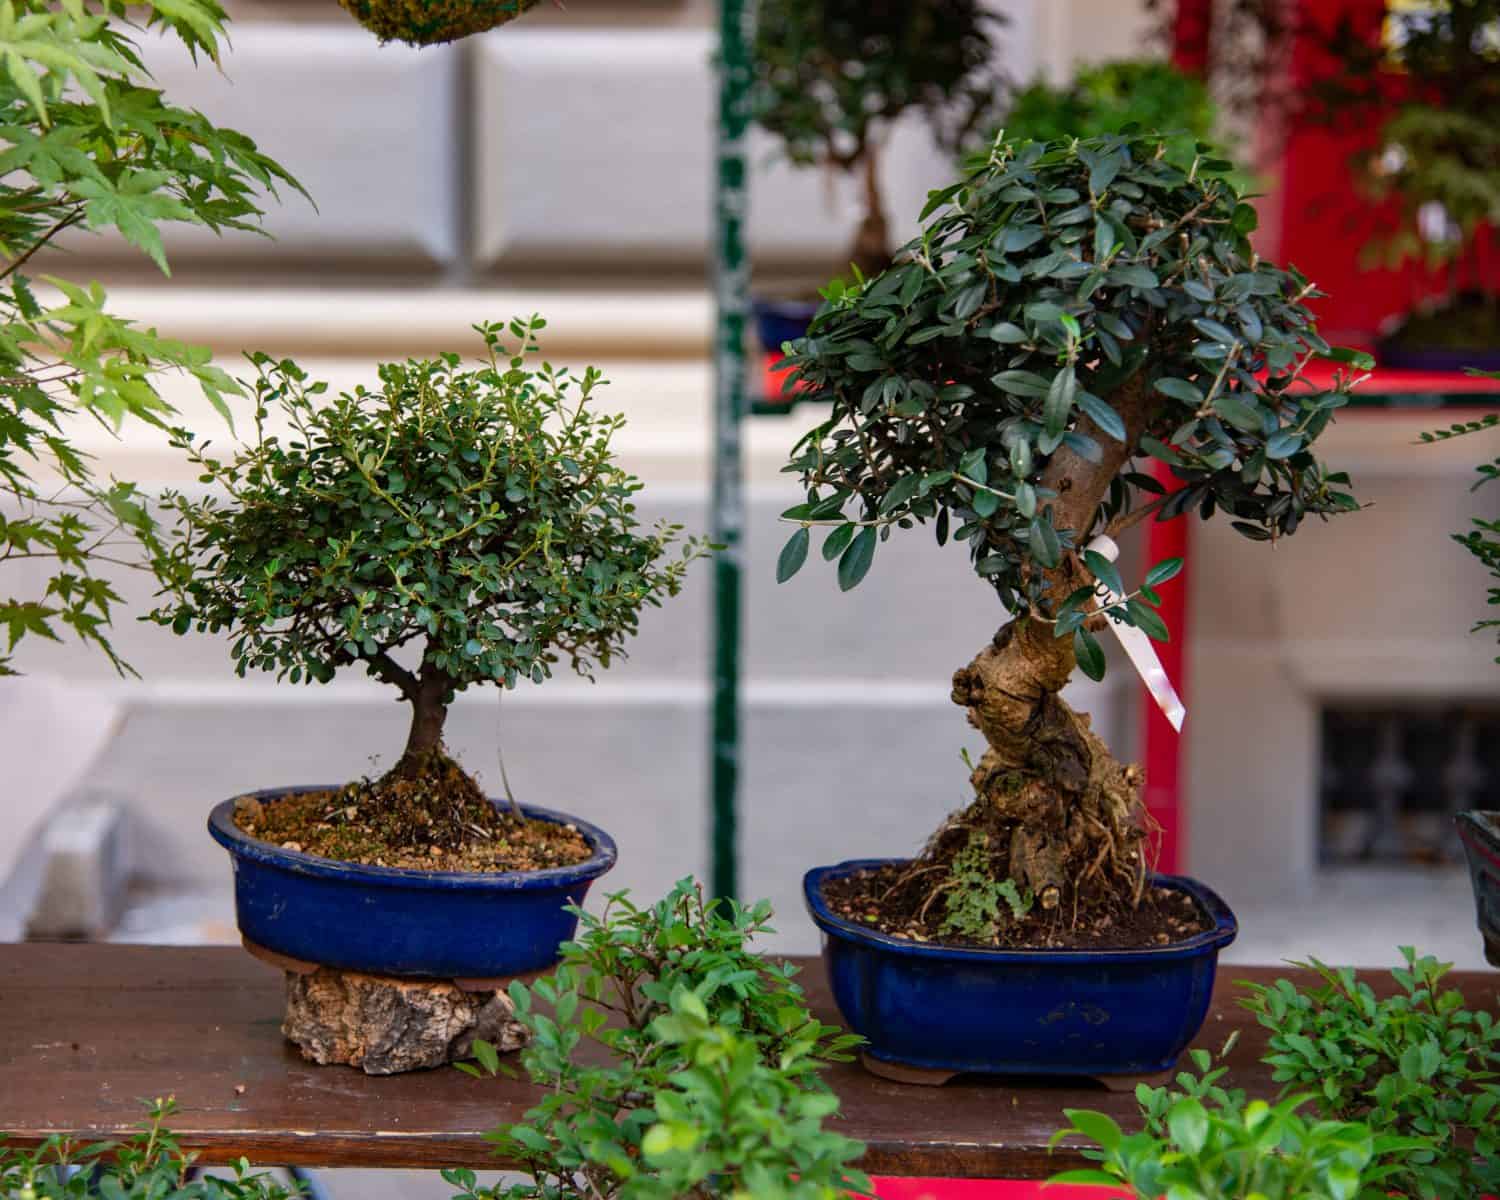 Bonsai are miniature trees, which are intentionally kept dwarfs, even for many years, through pruning and root reduction. Bonsai species Ulivo, Ilex Crenata, Maple